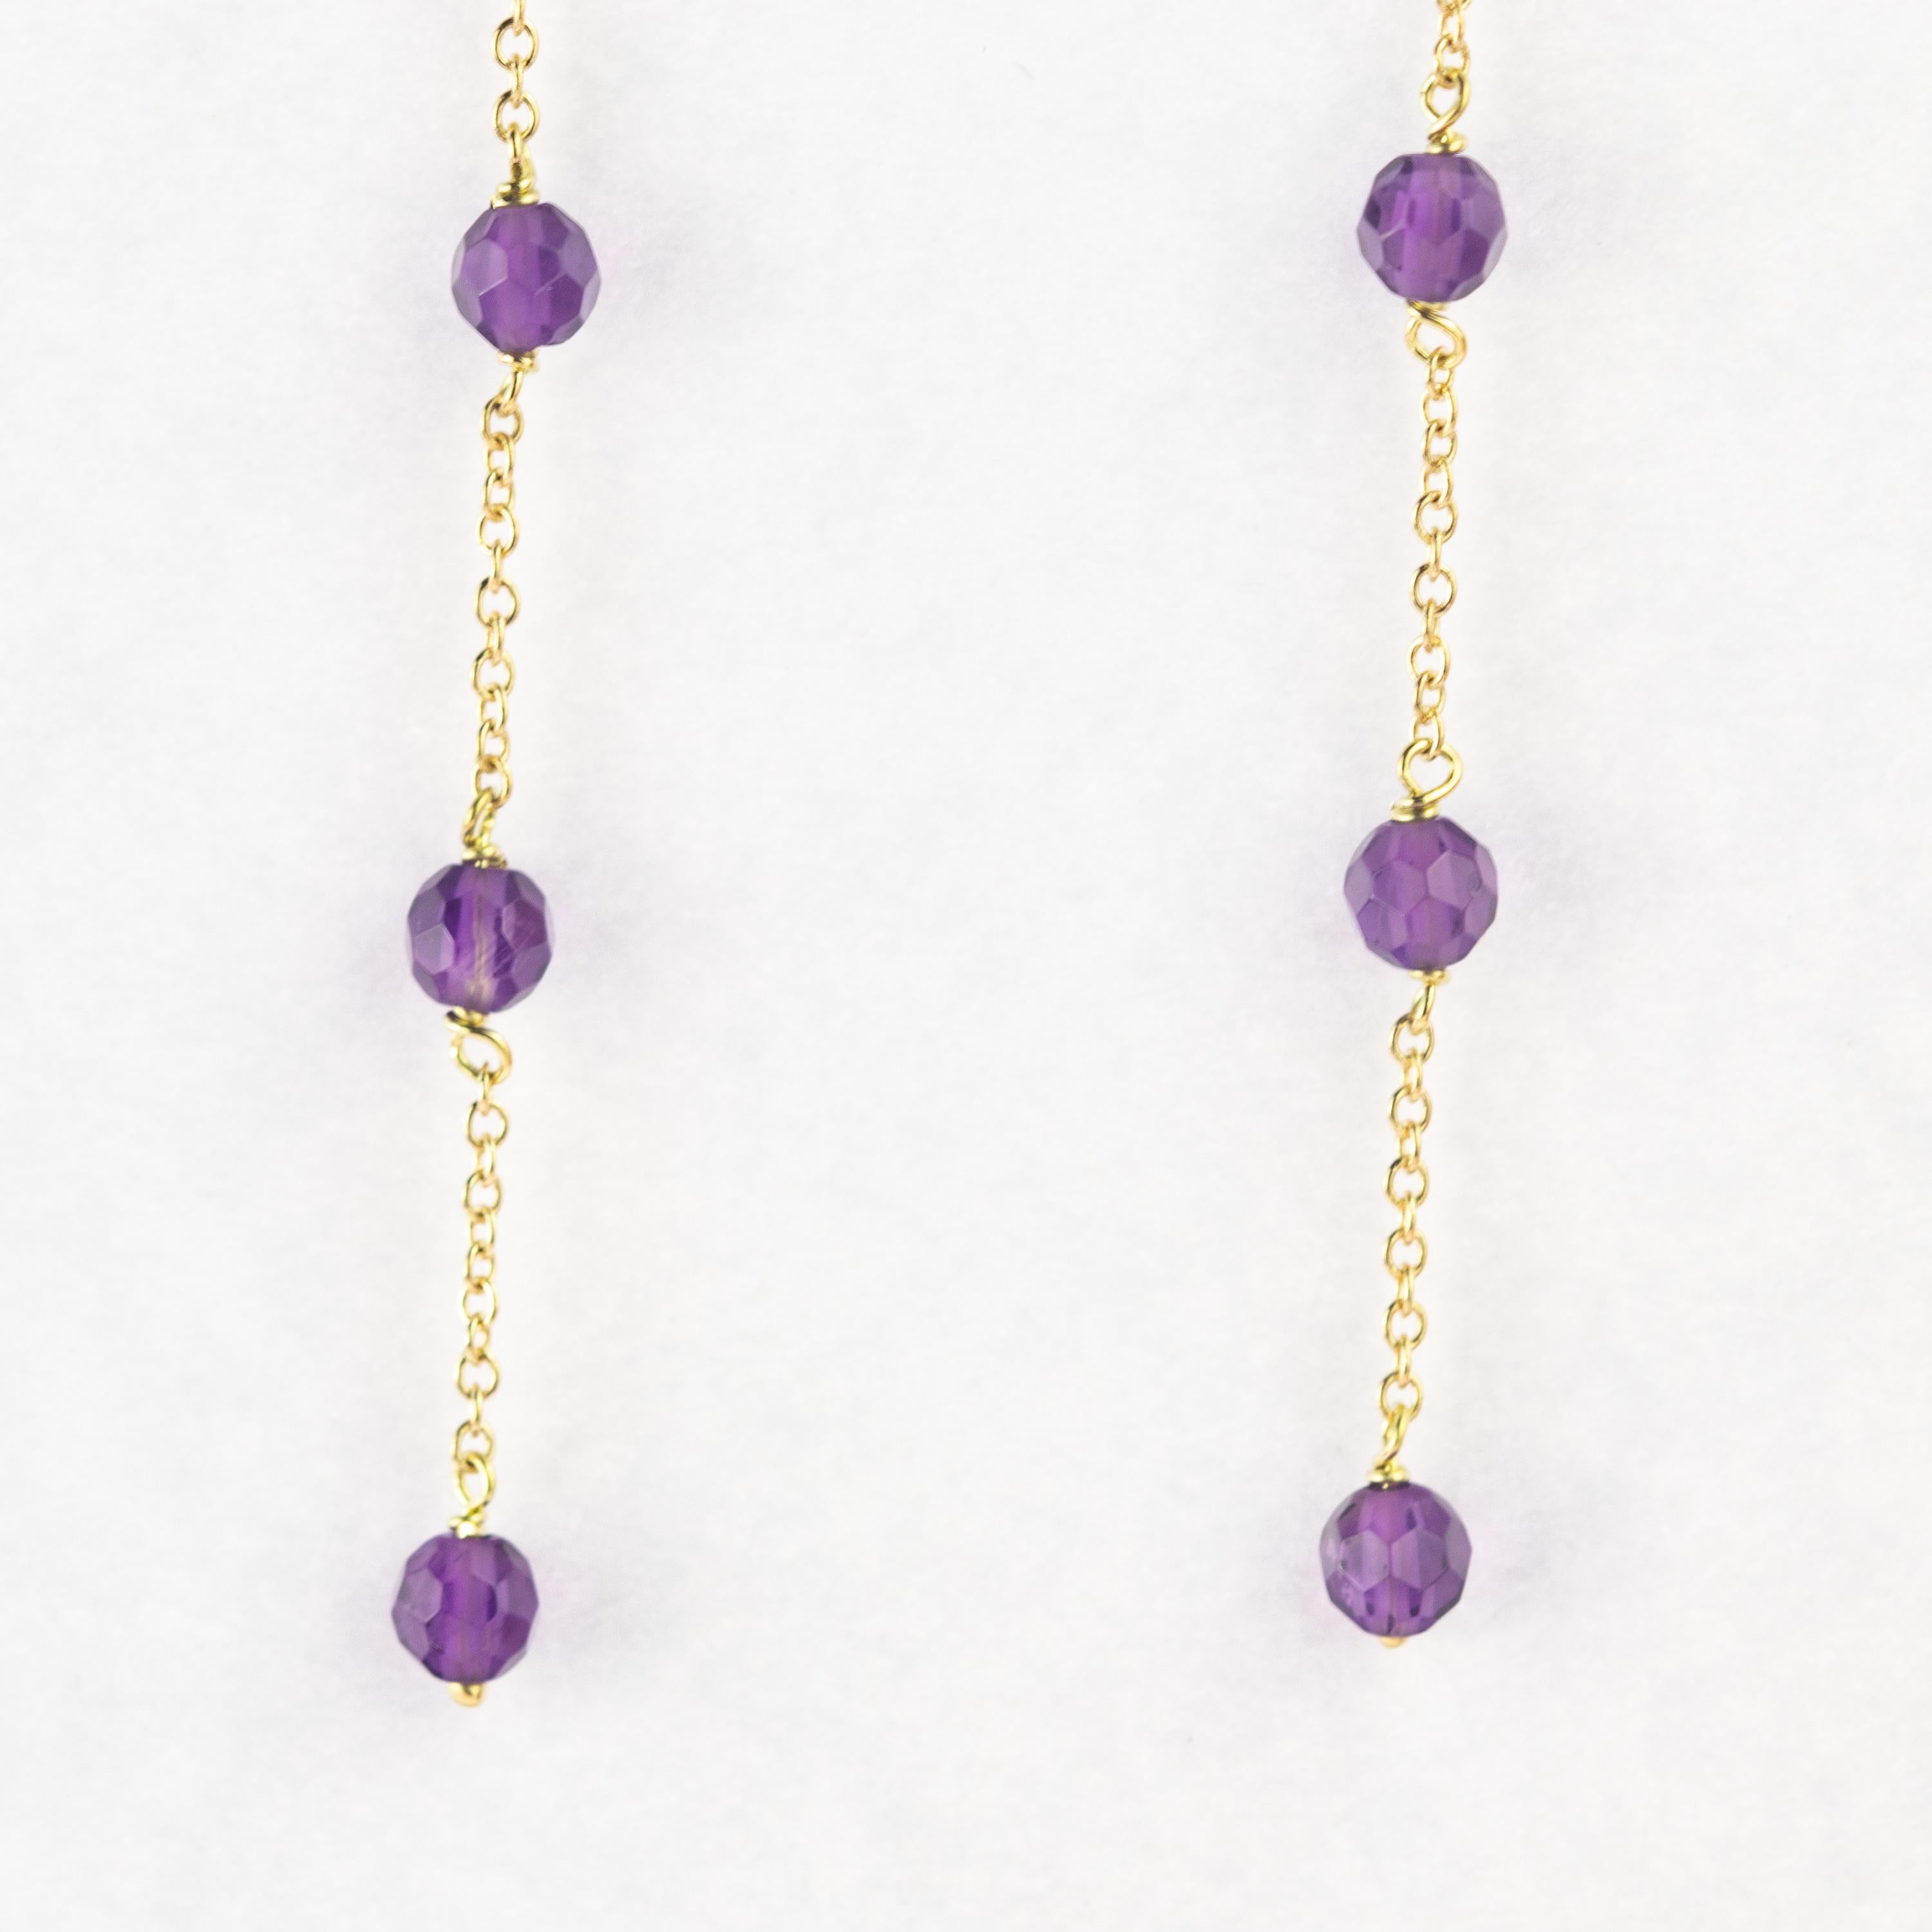 Intini Jewels signature quality on a modern and contemporary design jewel. Stunning long and dangle earrings with three amethyst beads. Embellished with a 18 karat yellow gold chain will make you look beautiful and full of charm

Amethyst is marked